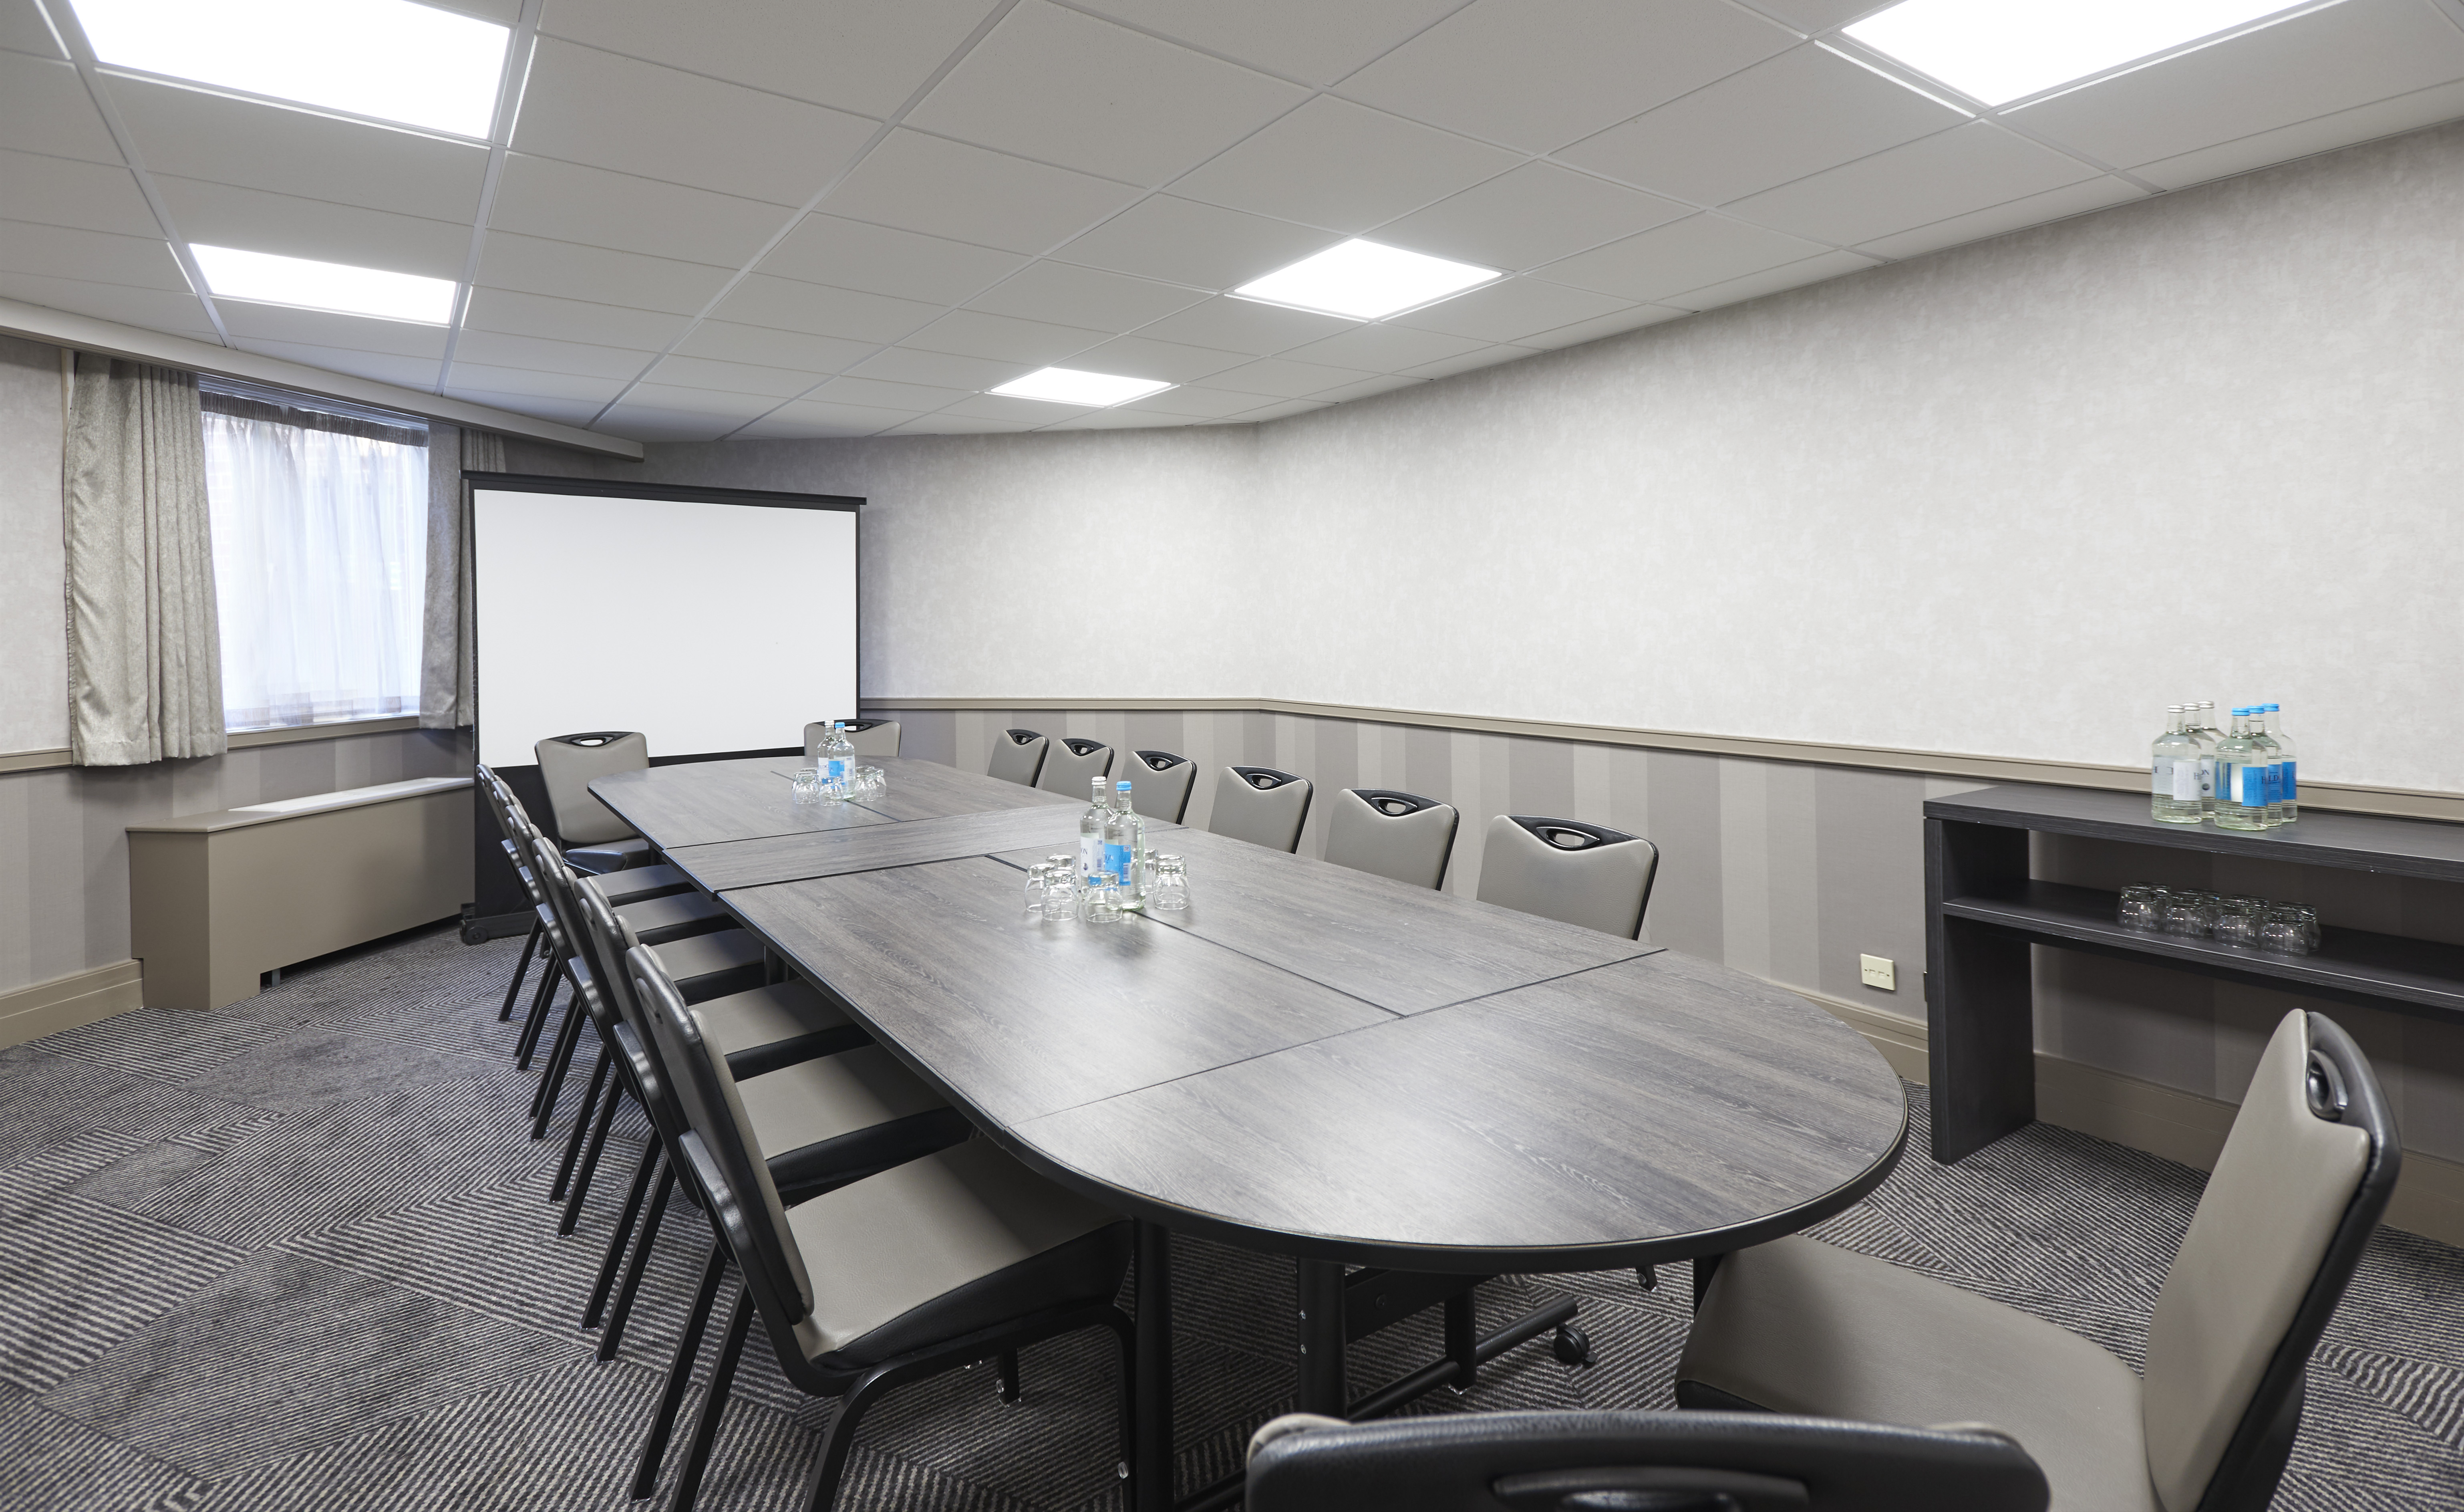 Angled View of Window With Sheer Drapes, Presentation Screen, Beverage Station, and Seating For 16 At Boardroom Table With Water Bottles and Drinking Glasses in Hermitage Suite